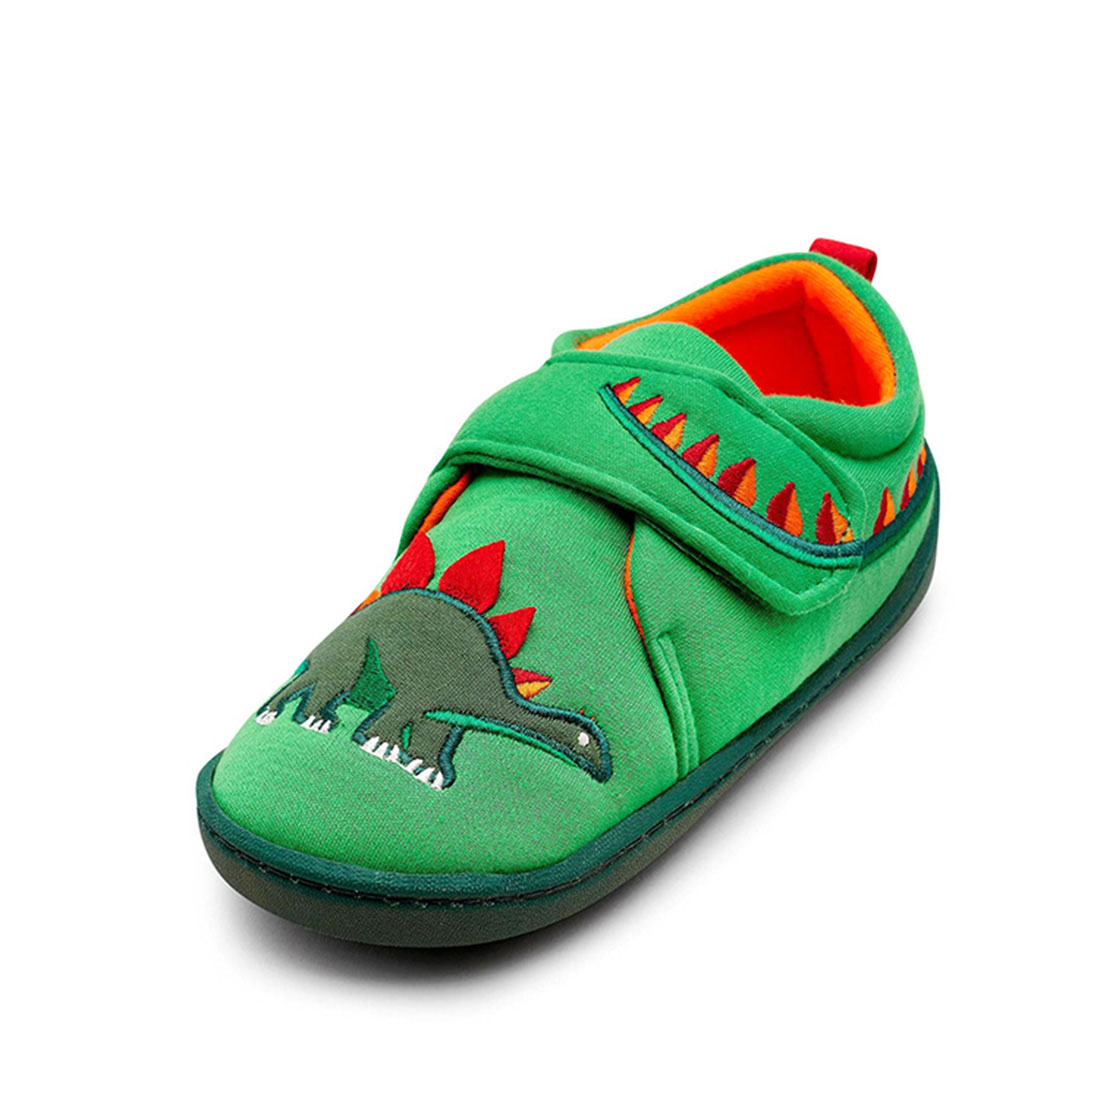 Fabric green flat fashion lovely design dinosaurs embroider toddler ...